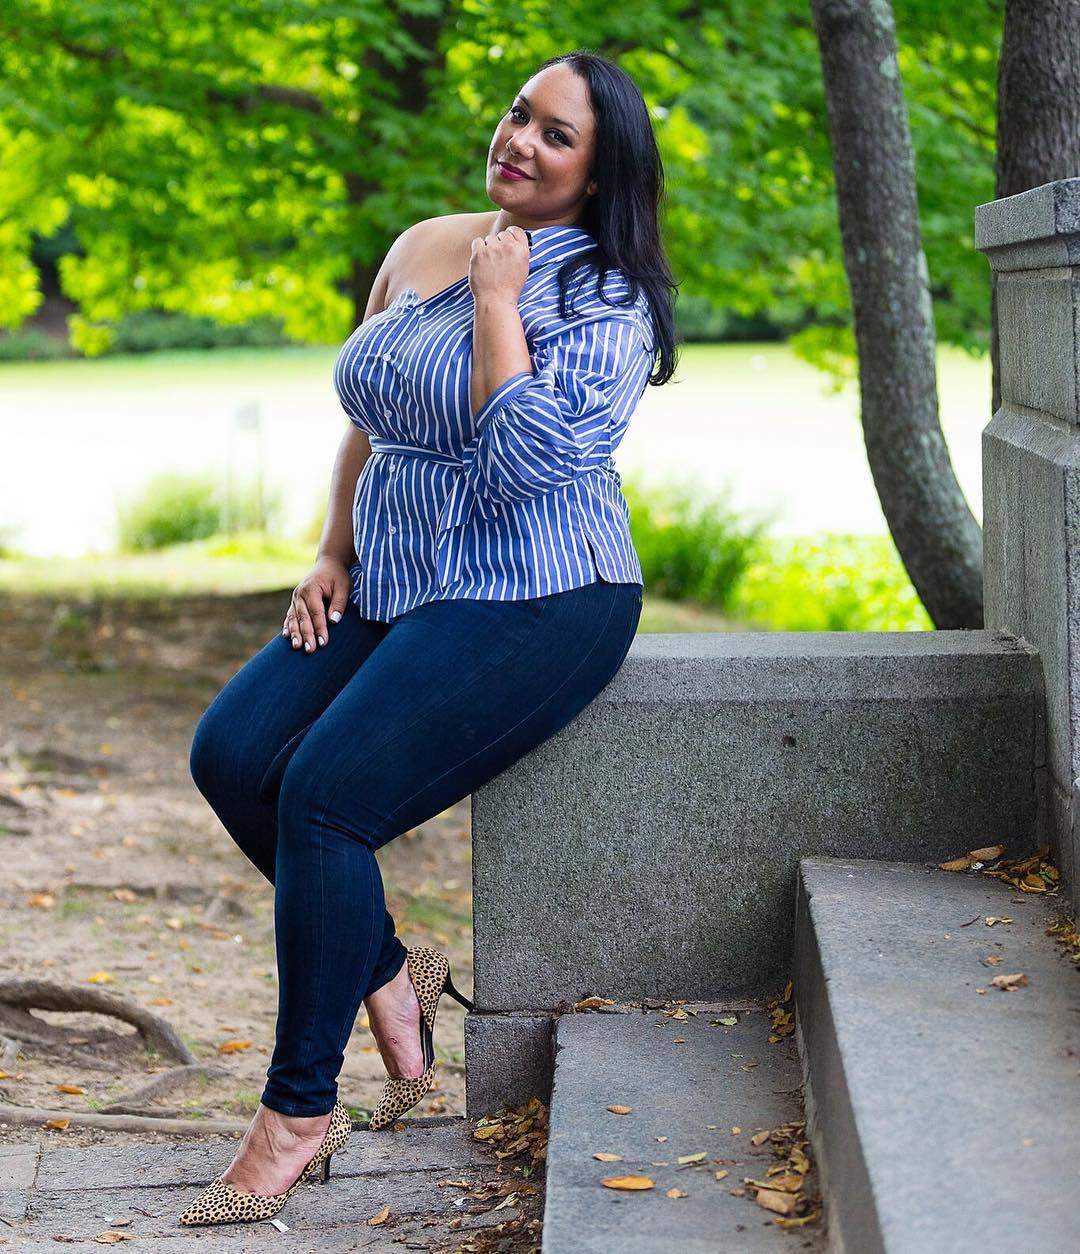 Plus Size Fashion Blogger Spotlight: Amy of The Chief of Style